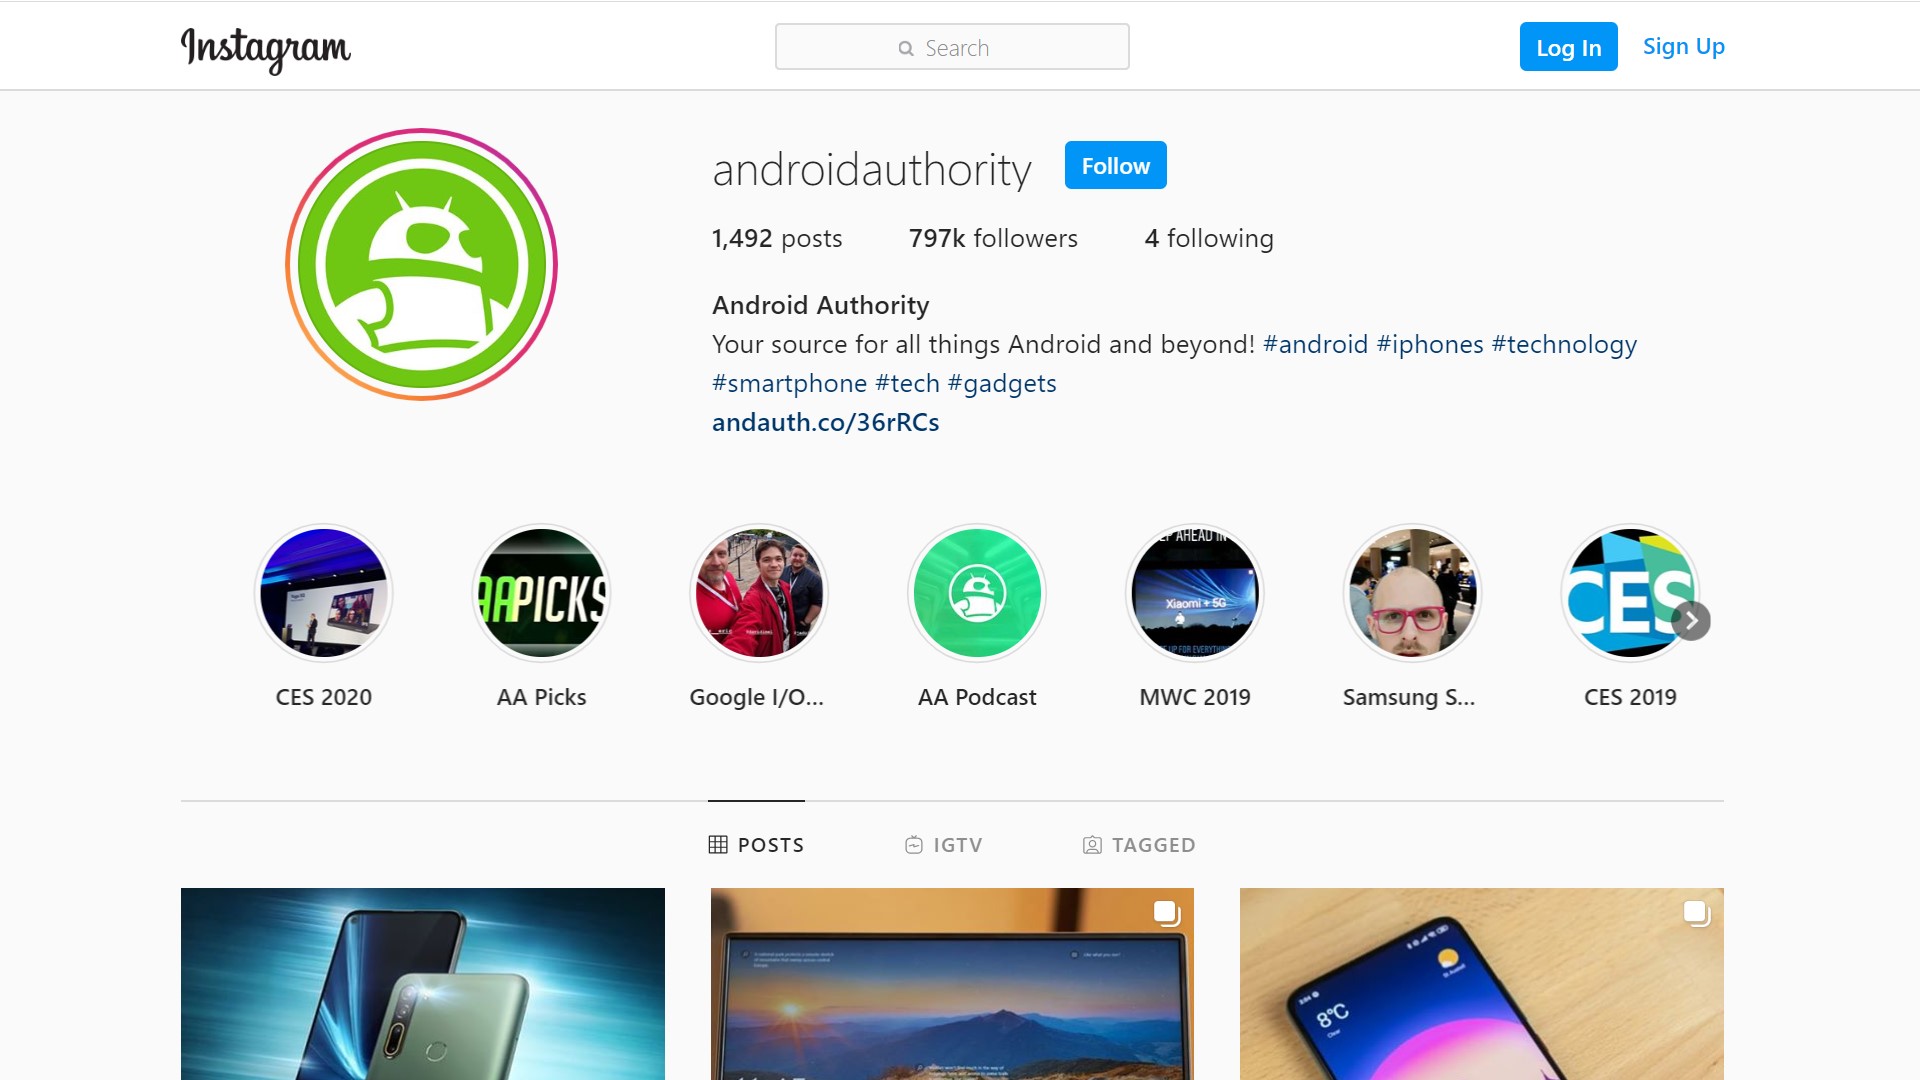 Instagram web interface - How to change your Instagram username